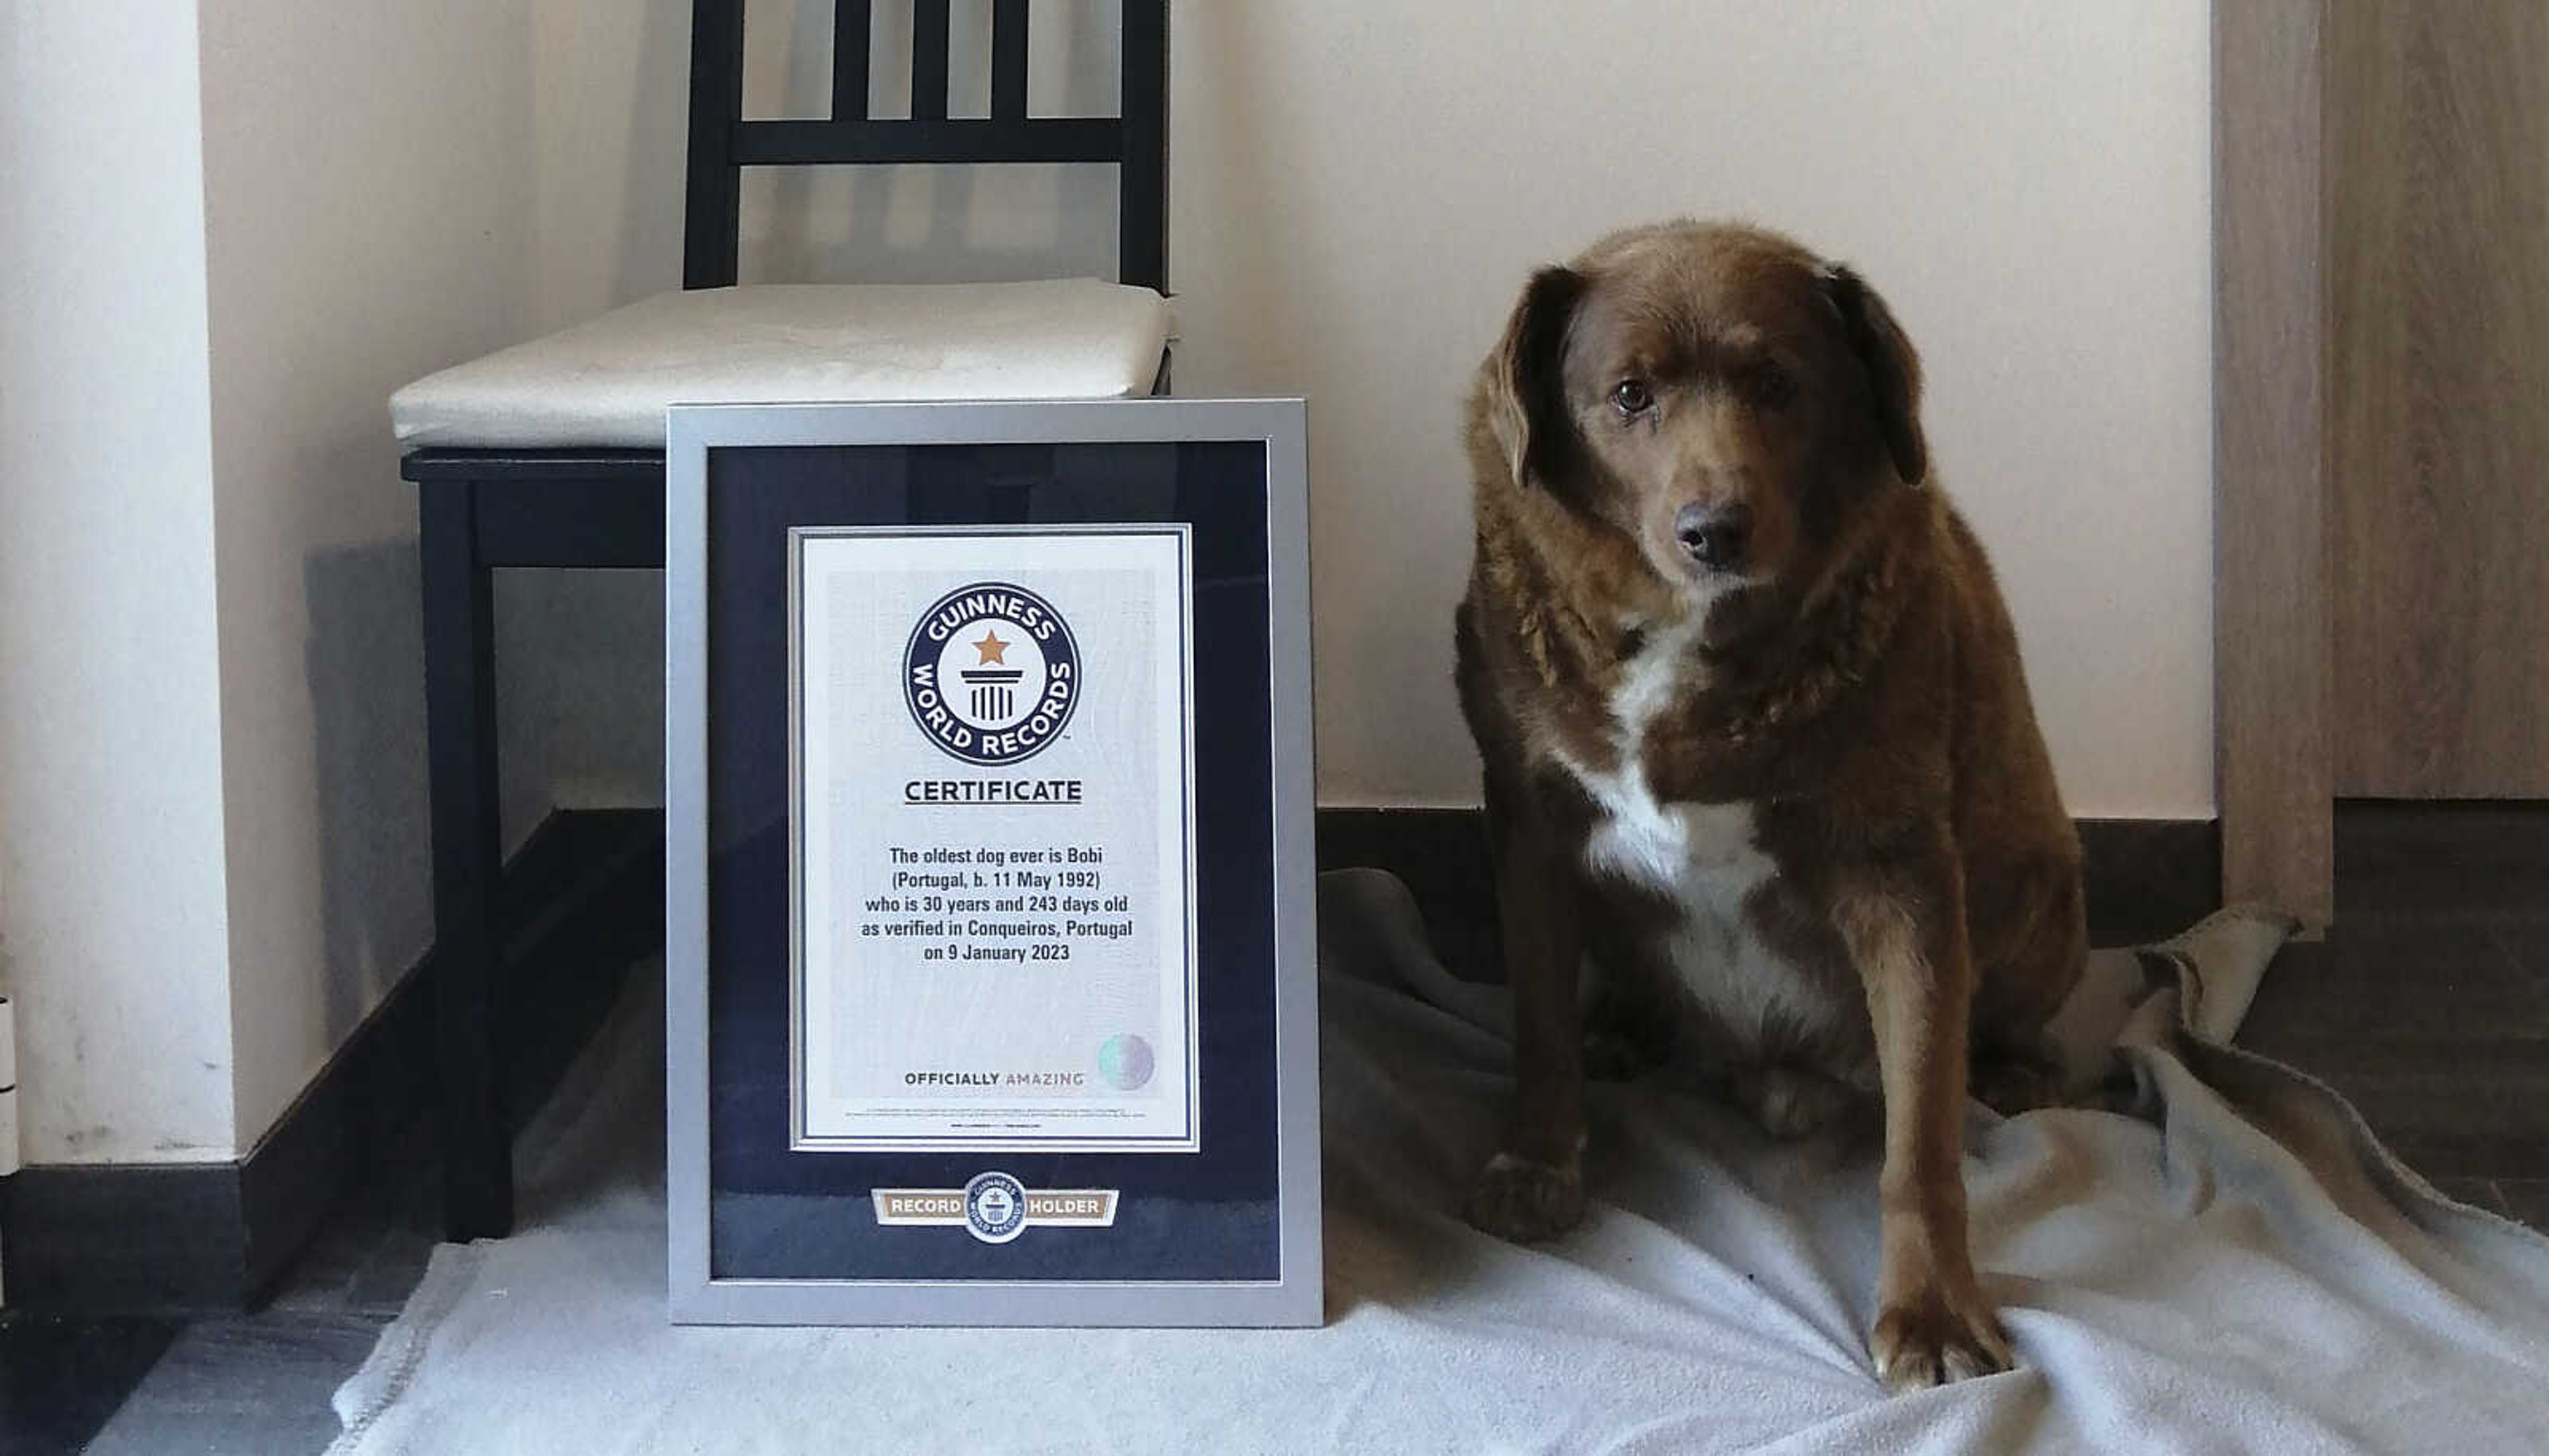 Bobi in Conqueiros, Portugal. Guinness World Records says the world's oldest dog recently celebrated his 31st birthday. Bobi's owner says a party was held Saturday for the purebred Rafeiro do Alentejo, a breed of Portuguese dog.